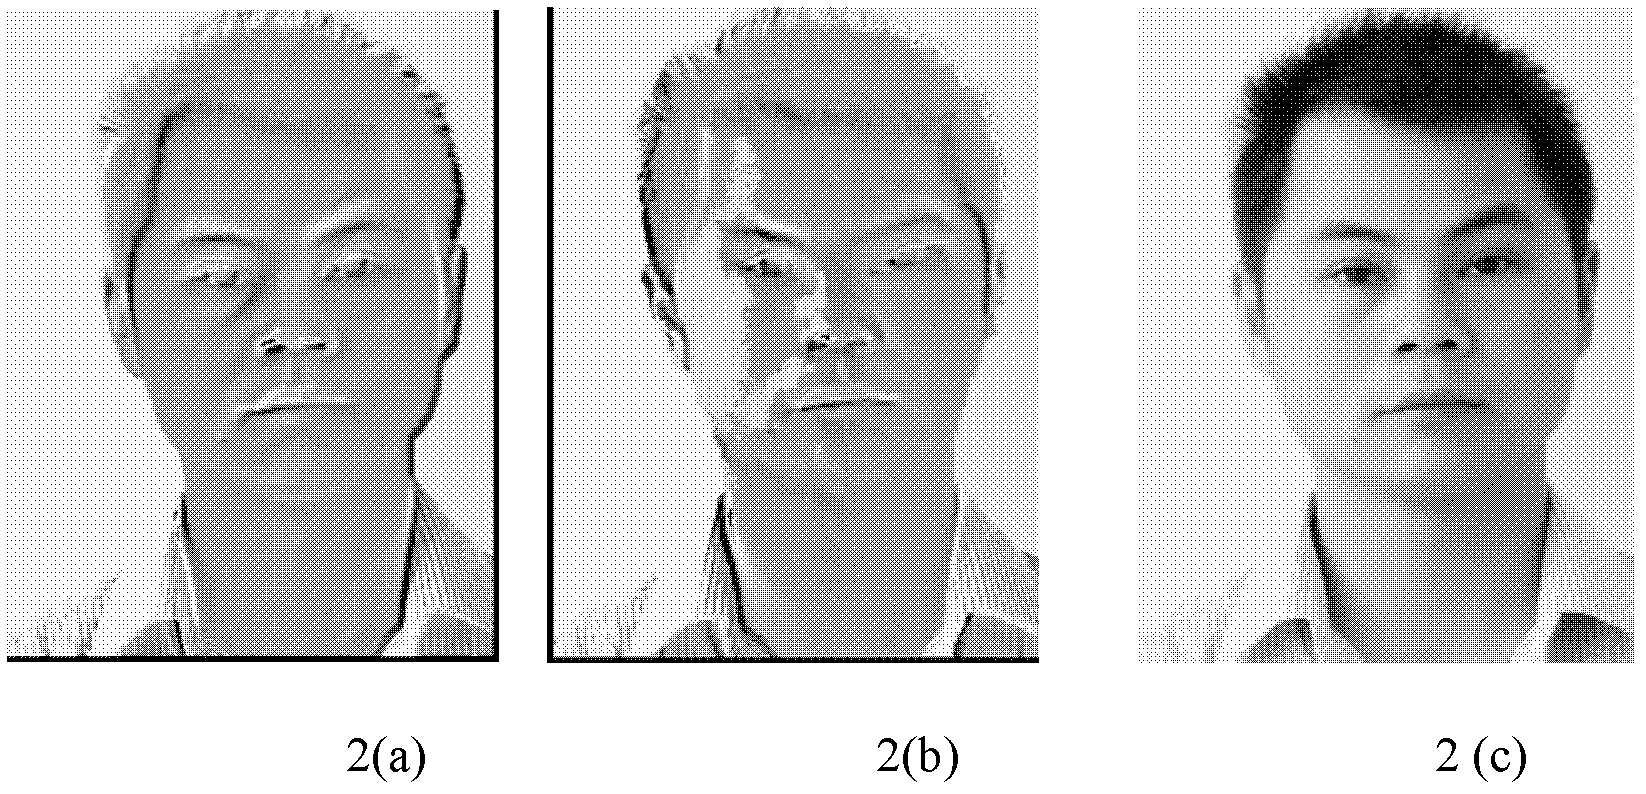 Method for realizing embossment effect of animation character and background of mobile phone